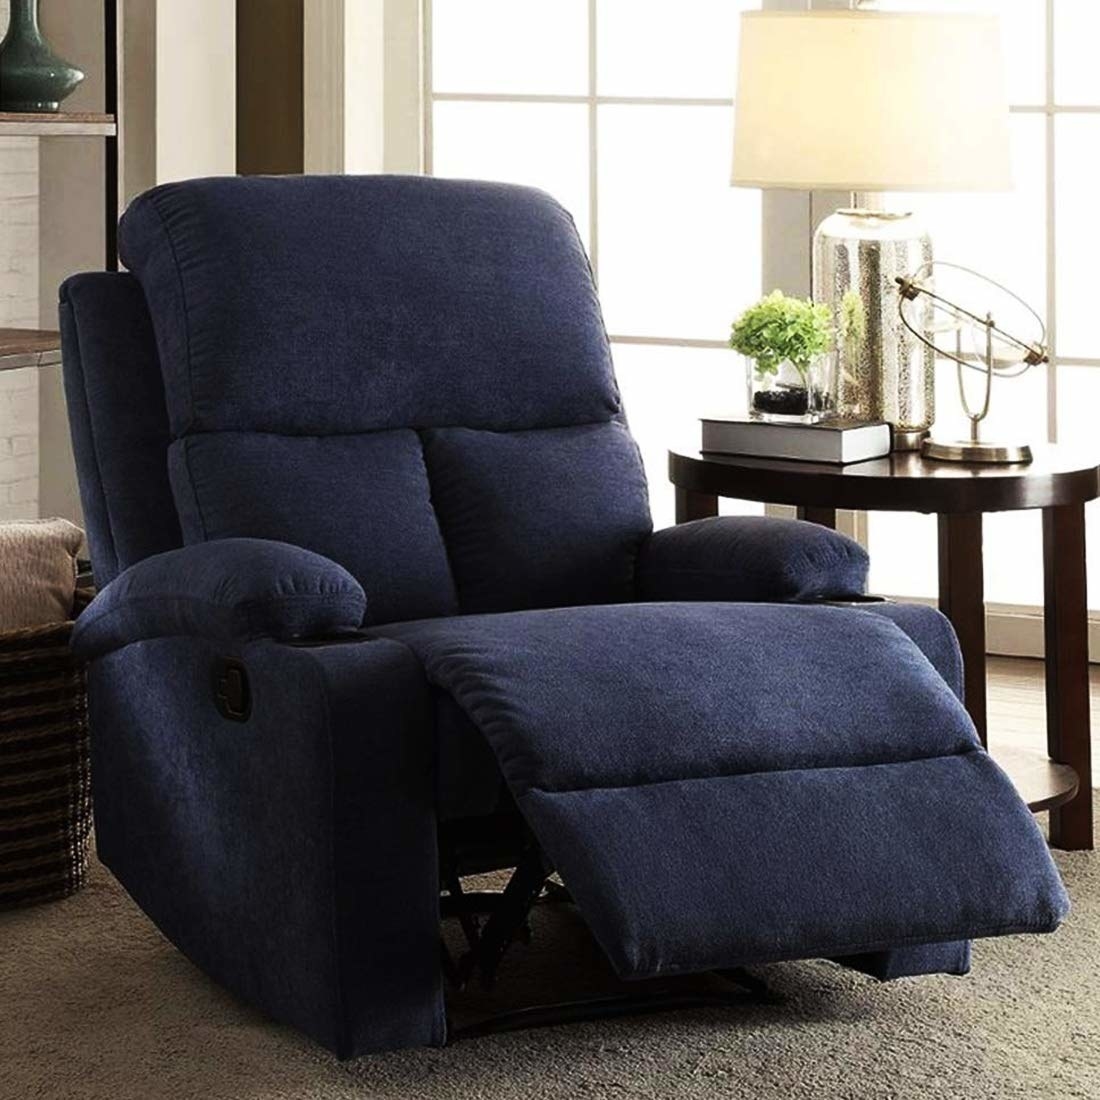 A blue recliner next to a side table with a lamp on it